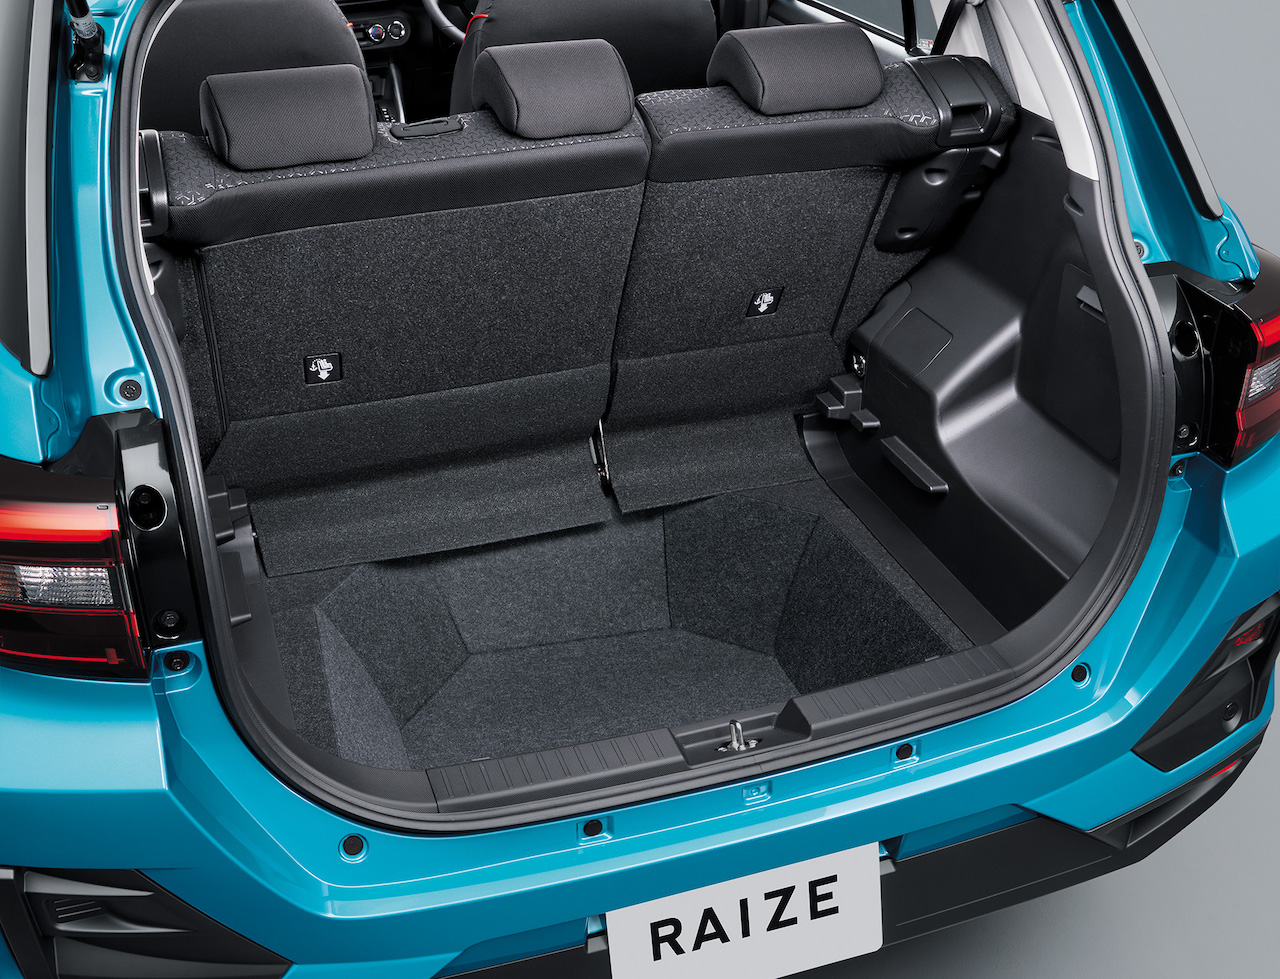 Toyota Raize launched